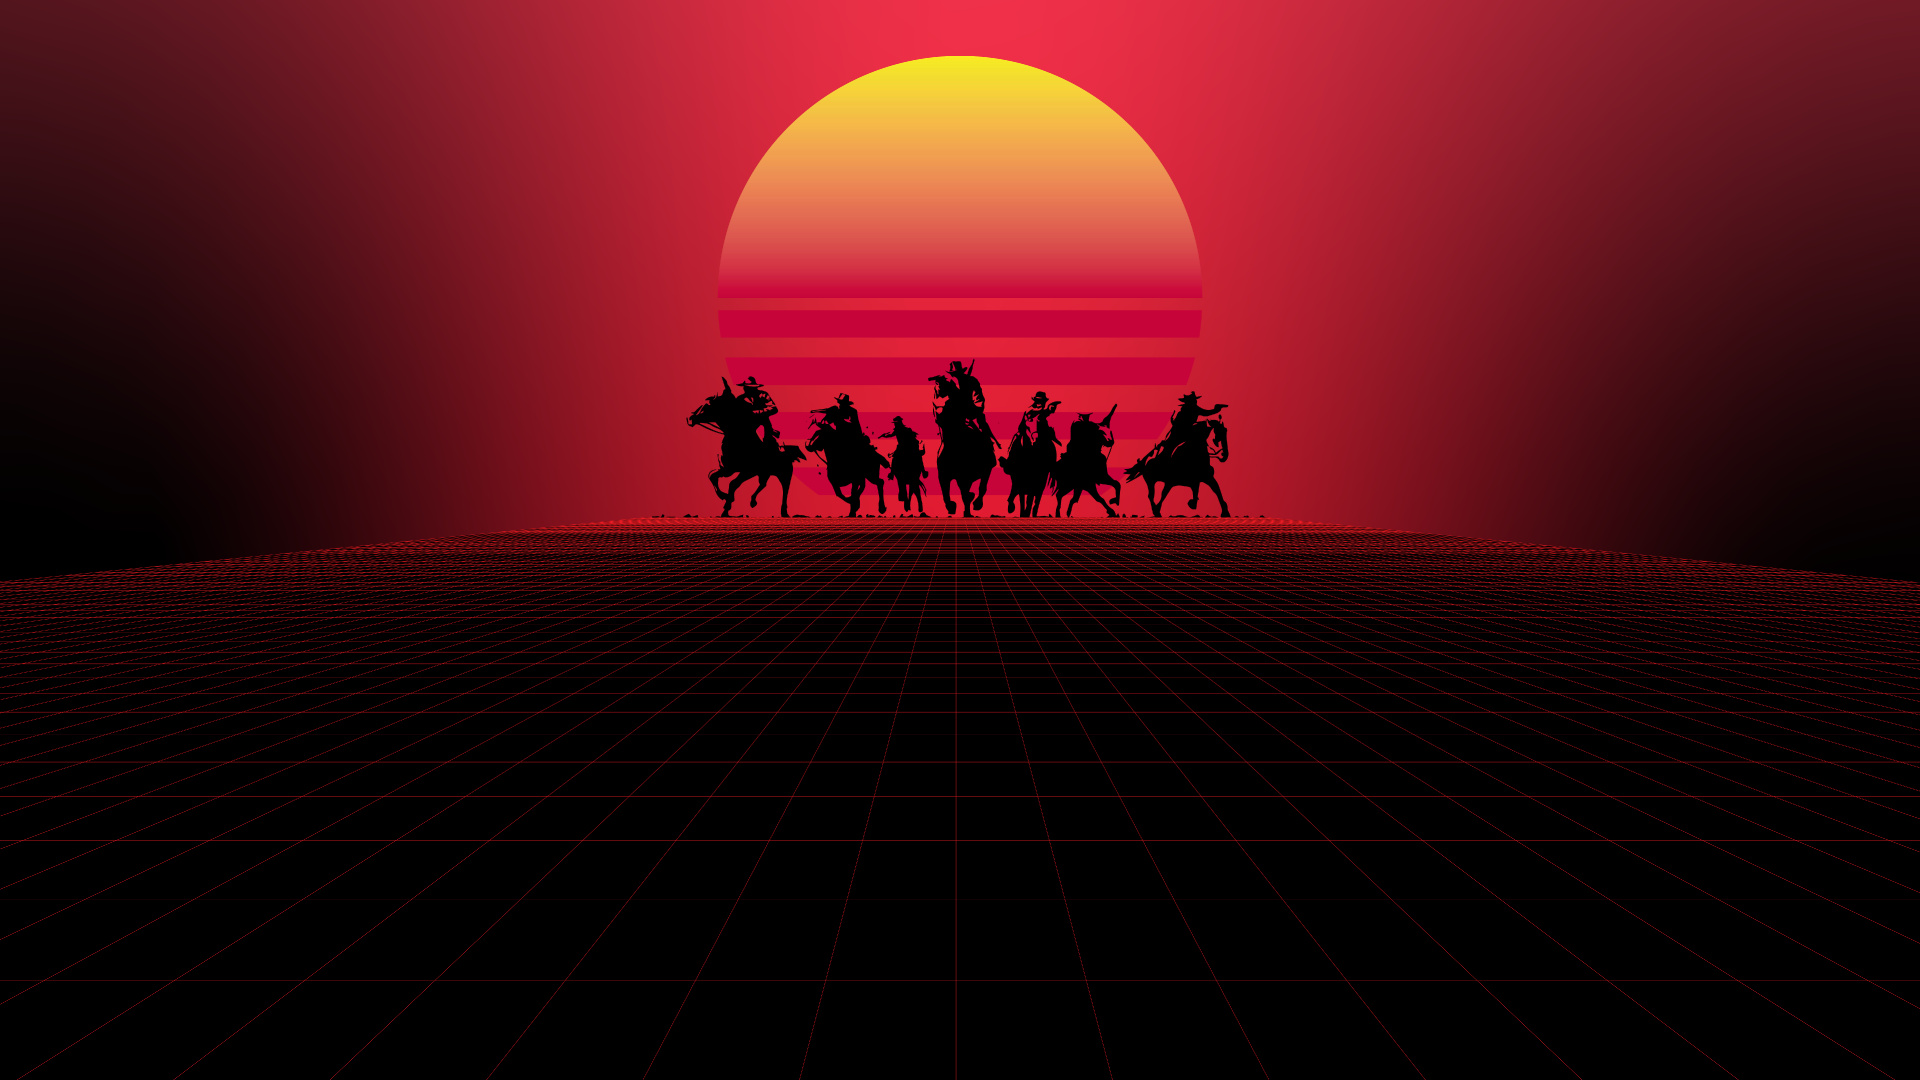 Red Dead Redemption, Red Dead Redemption 2, Red, Silhouette, Pack Animal. Wallpaper in 1920x1080 Resolution